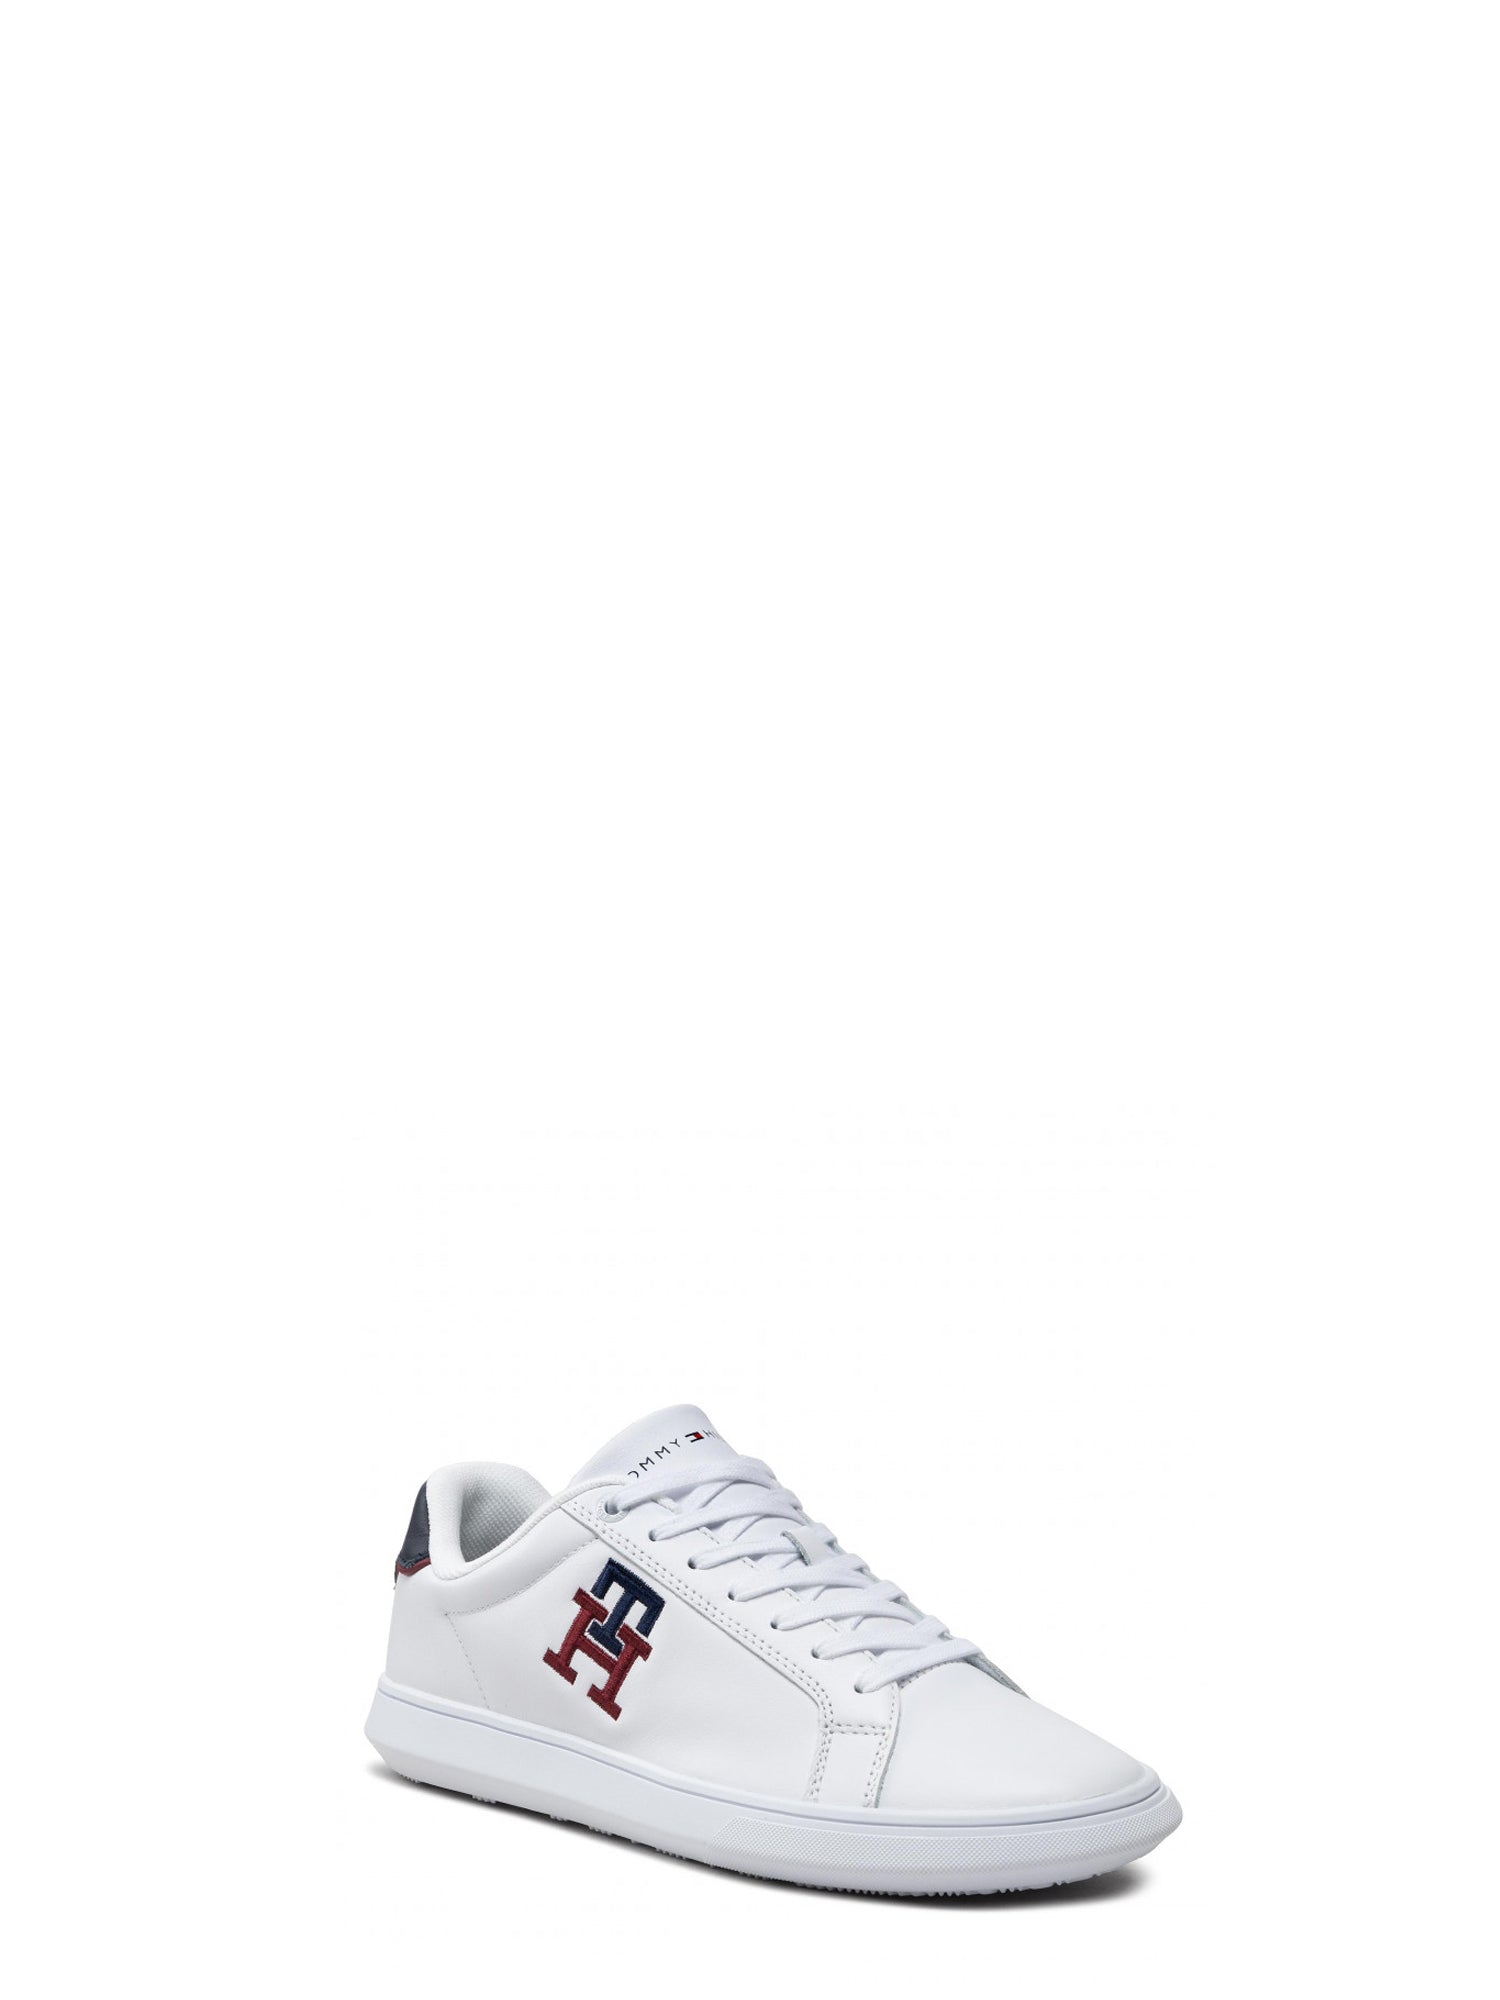 TOMMY HILFIGER SNEAKERS BASSE BIANCO